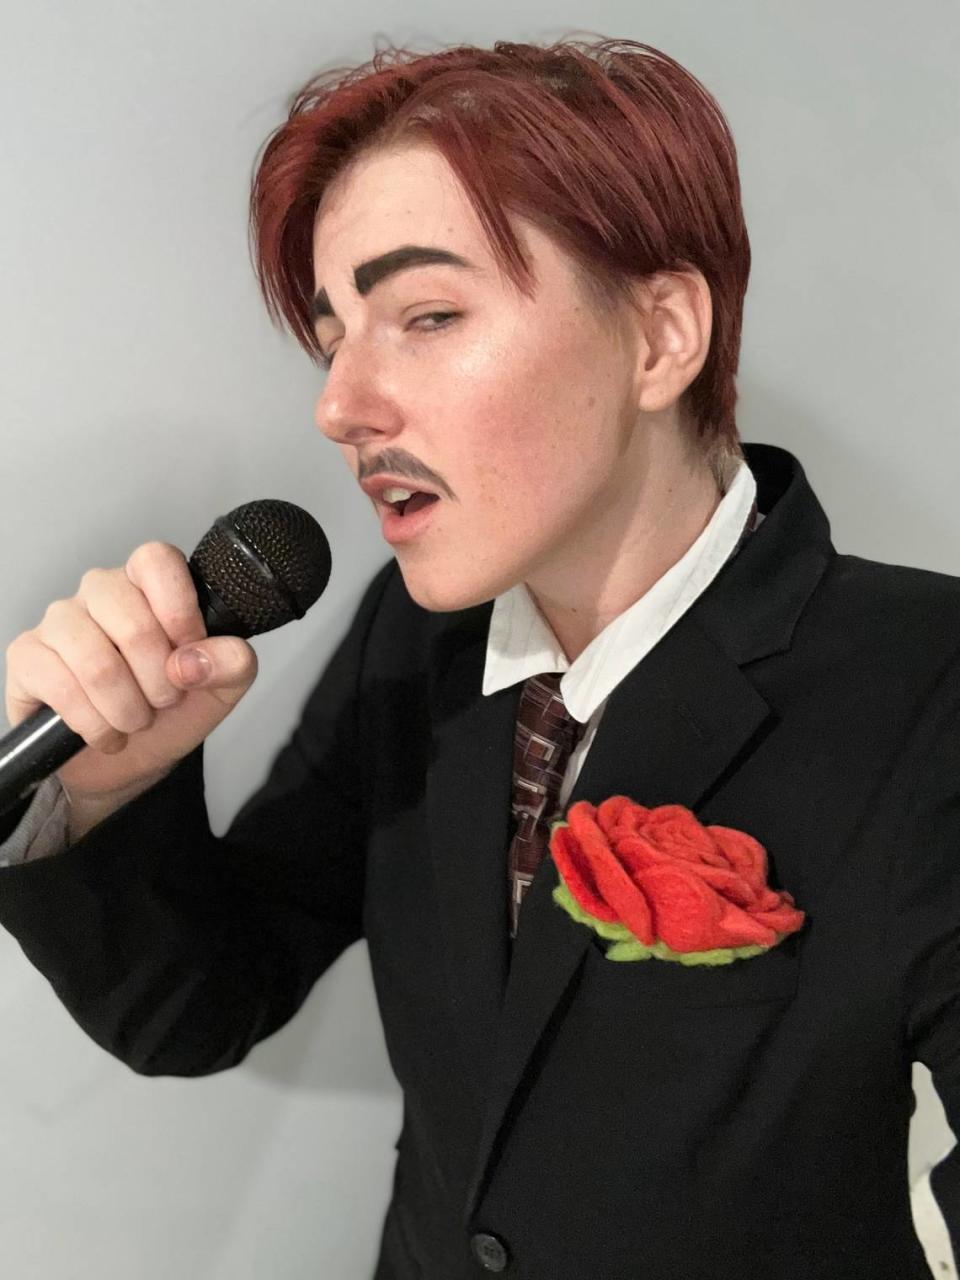 At a performance in November, Gray Gautereaux dressed their drag persona Jackson Havoc in a suit and performed a Michael Bublé song.